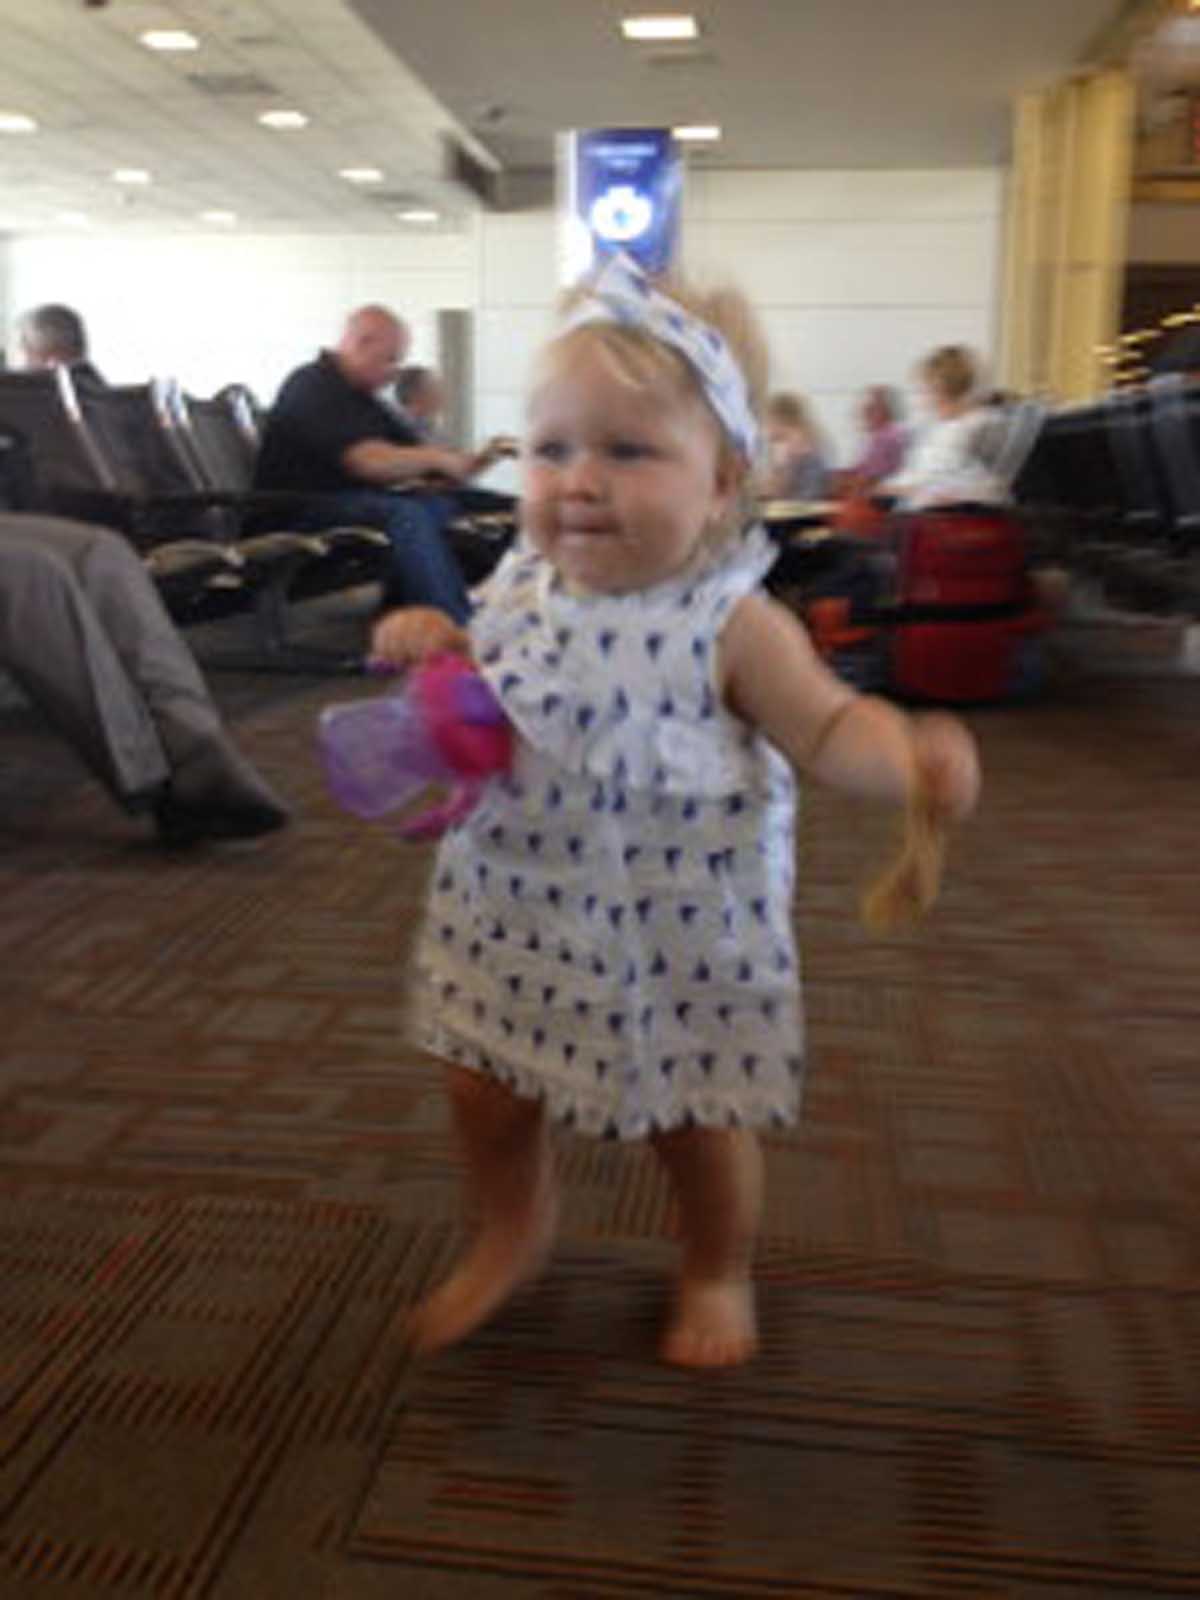 At the airport waiting for our flight. Again our girl all smiles running around the airport.. with pizza of course. 